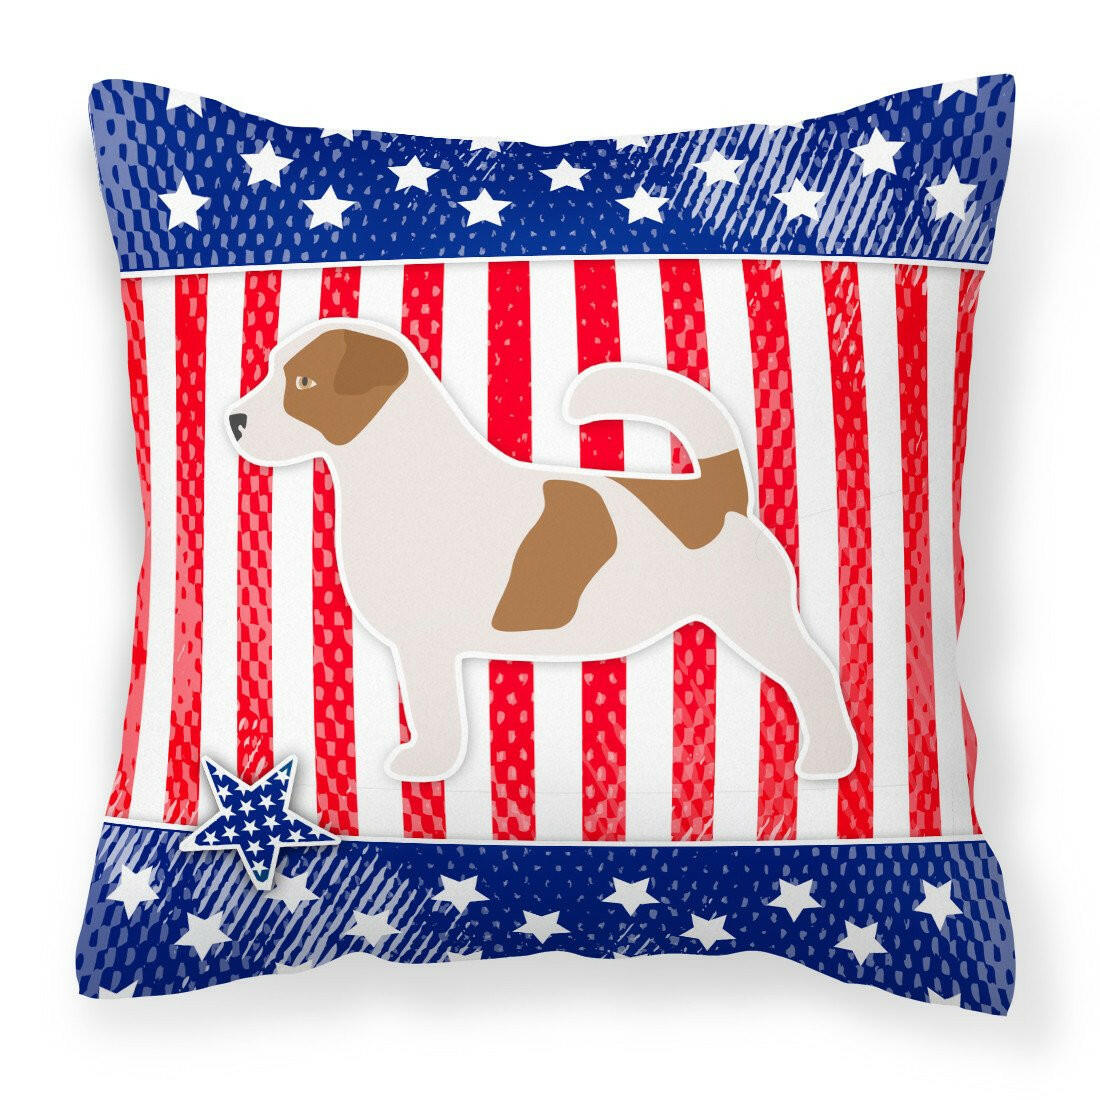 USA Patriotic Jack Russell Terrier Fabric Decorative Pillow BB3307PW1818 by Caroline's Treasures